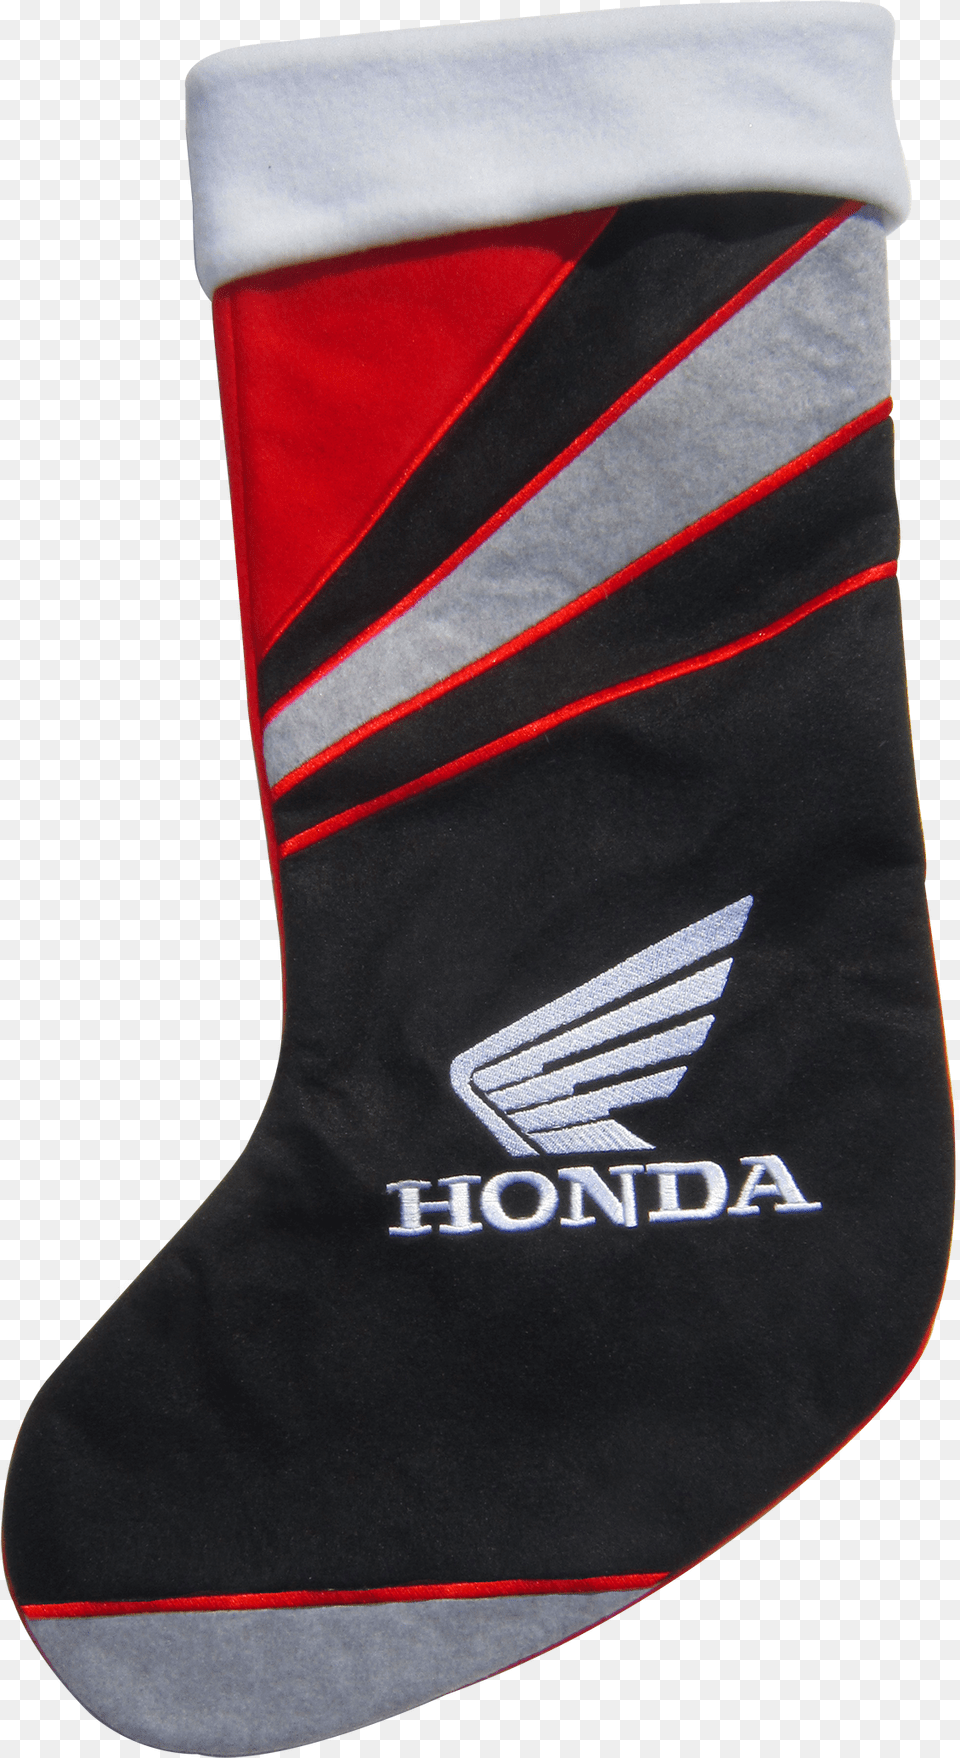 Honda Christmas Stocking Smooth Industries 1731 203 Holiday Stocking, Clothing, Hosiery, Christmas Decorations, Festival Free Transparent Png